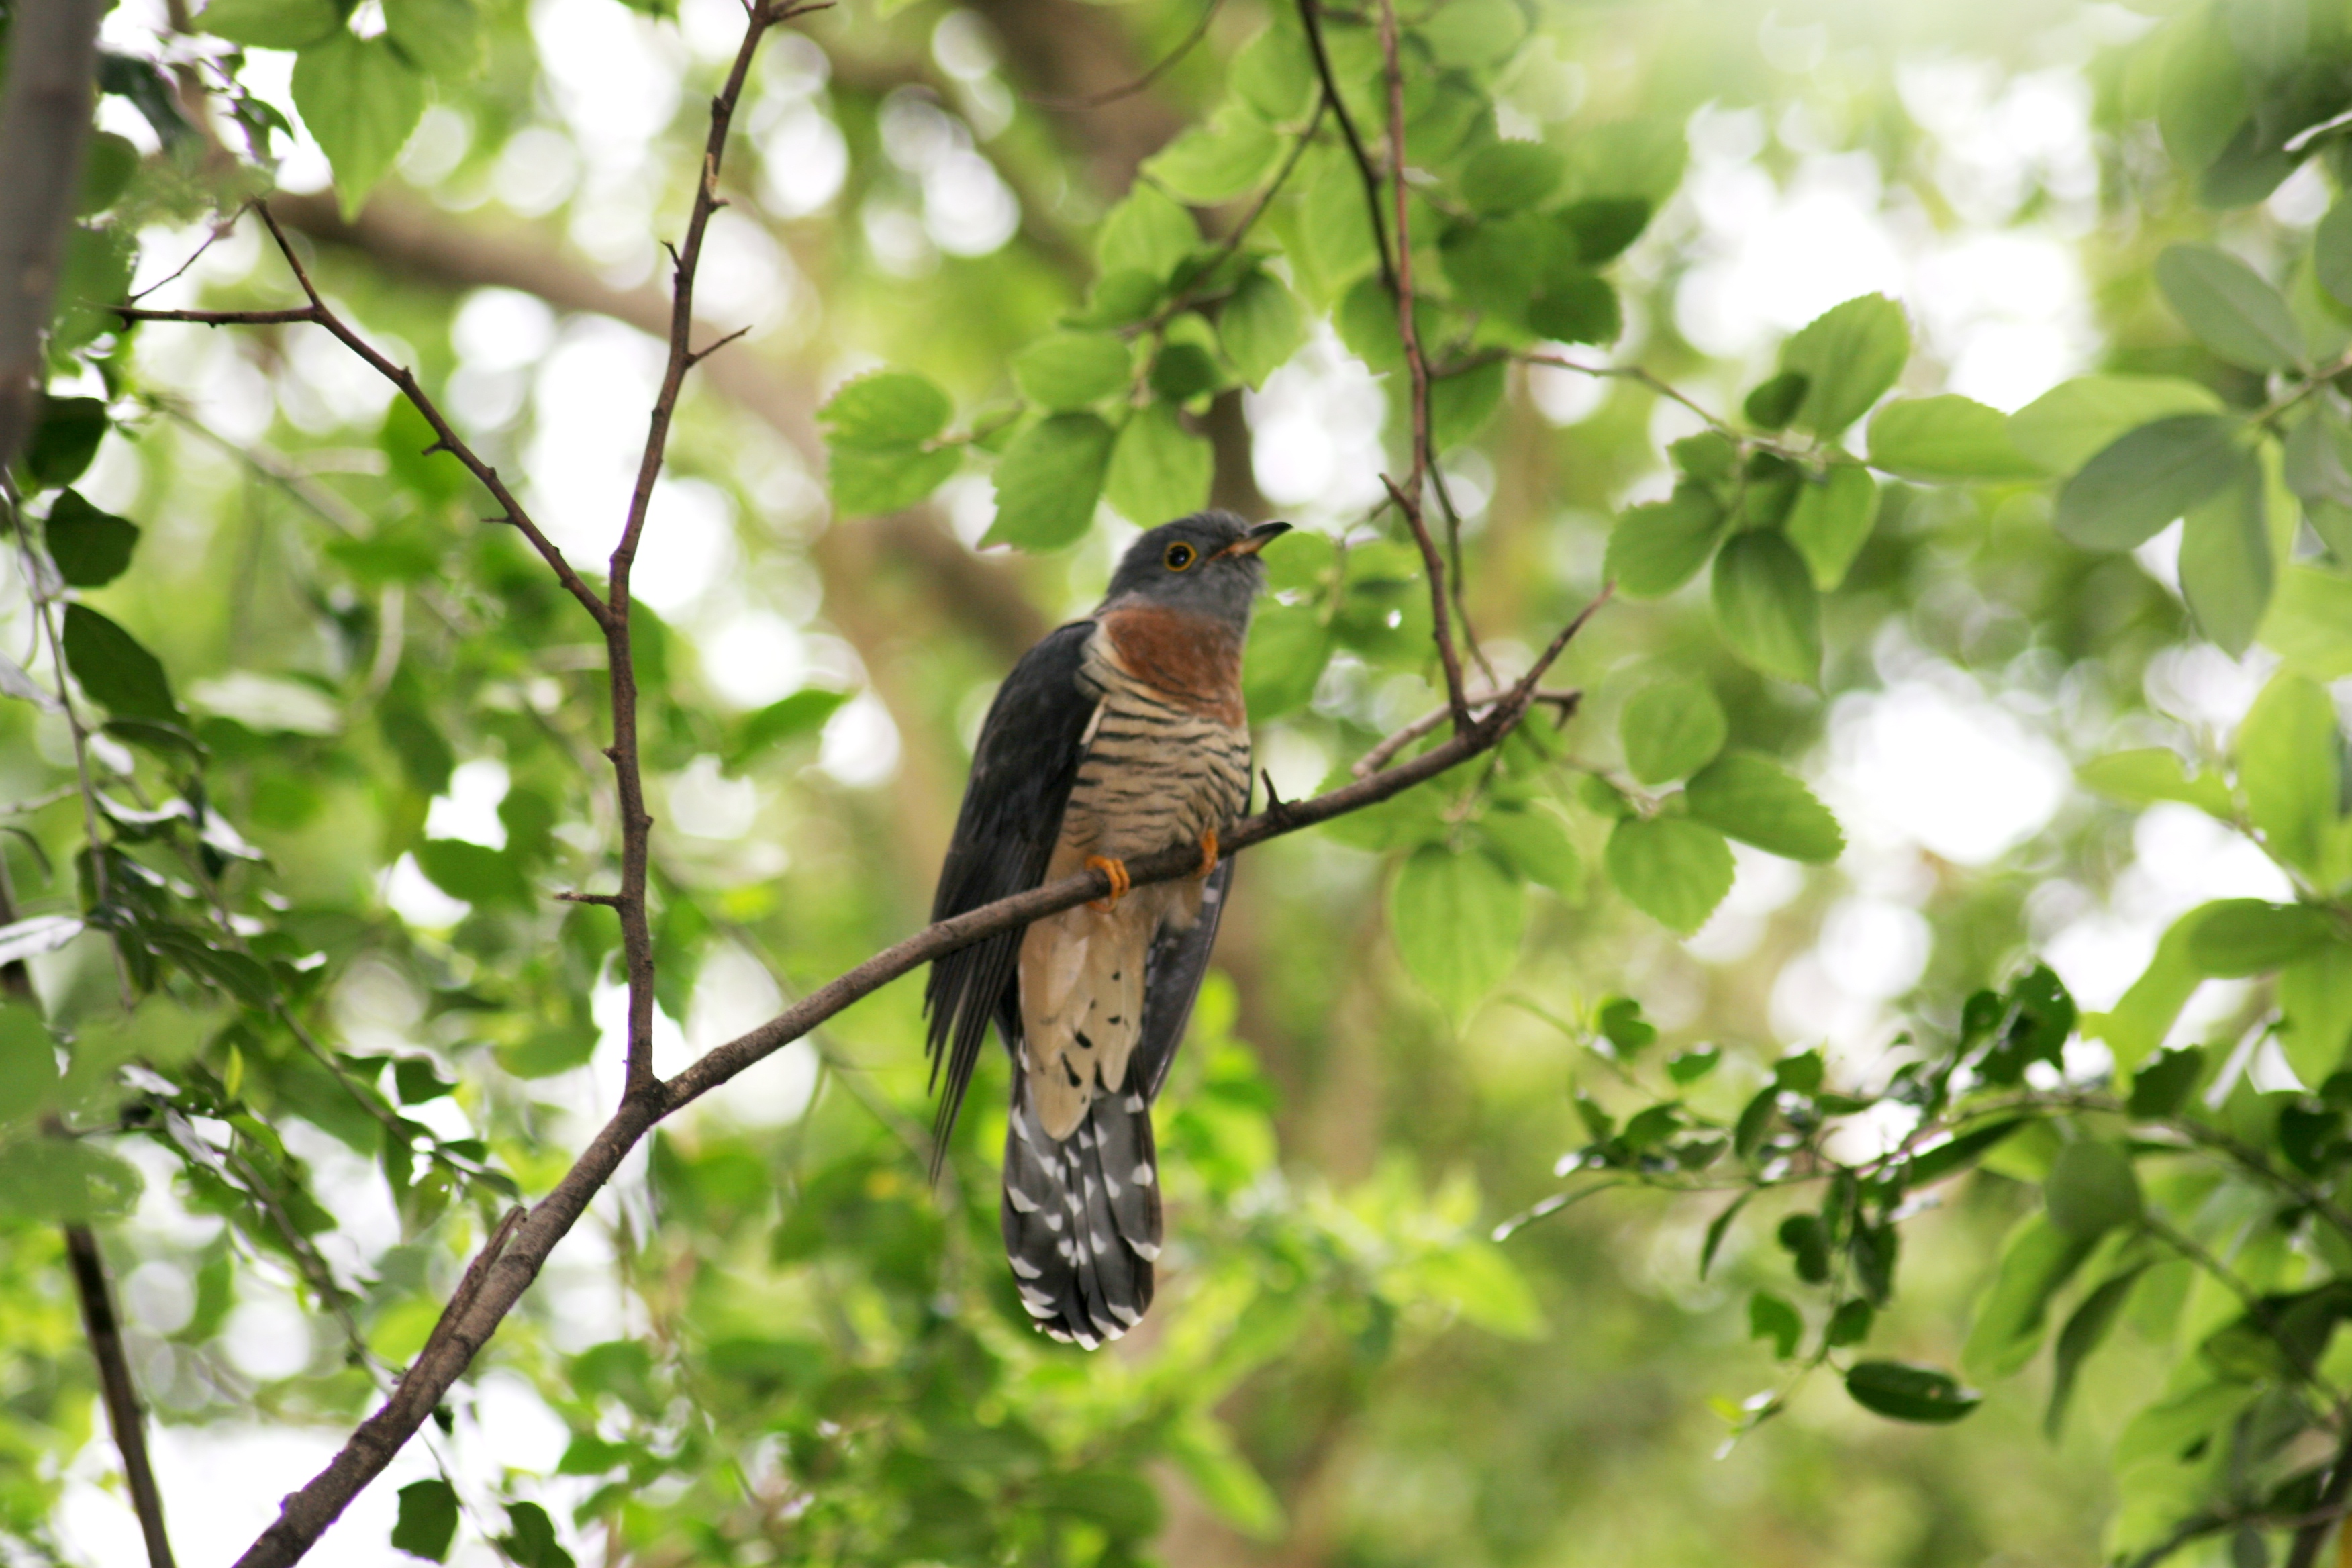 Red-chested Cuckoo (Cuculus solitarius) in tree